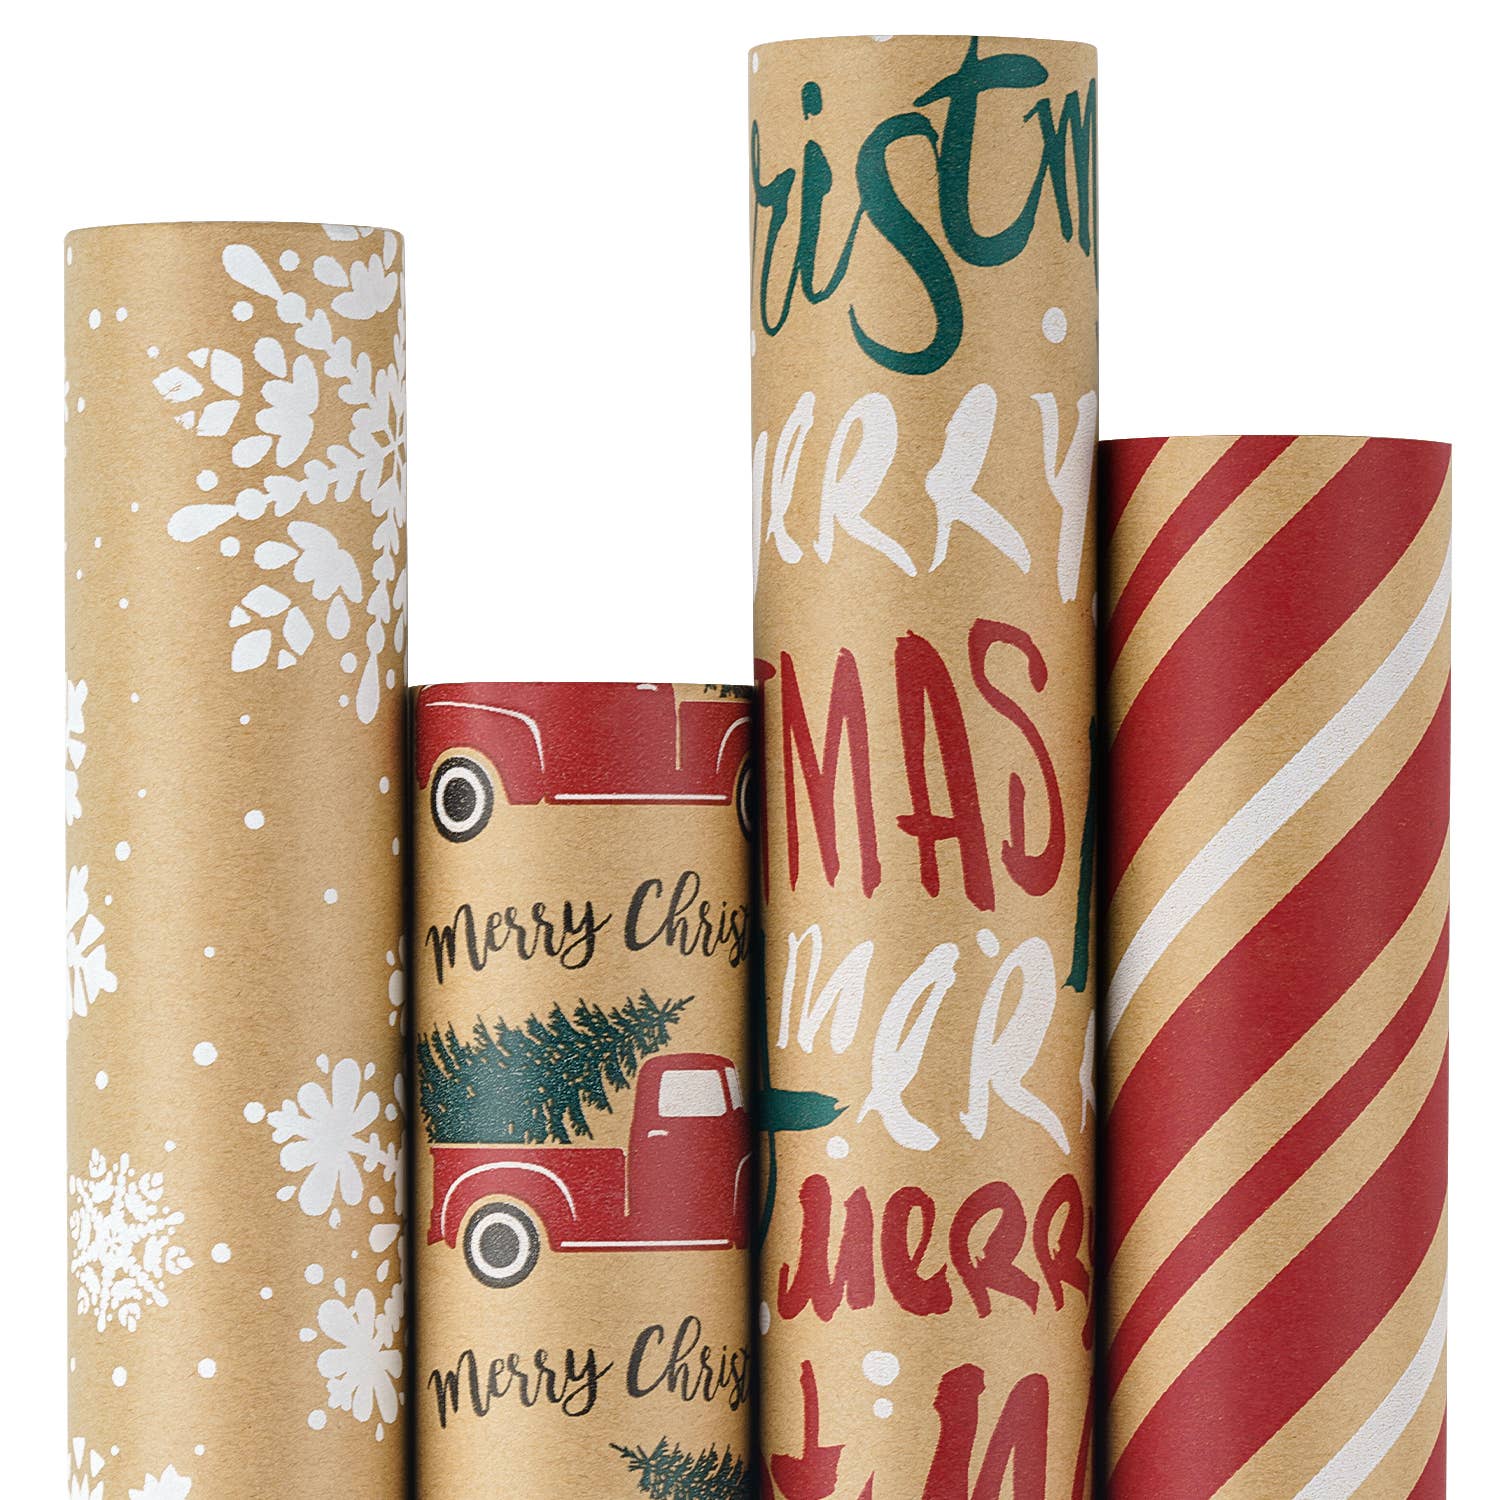 XMAS Kraft Wrapping Paper, Recycled Paper Roll Bundle